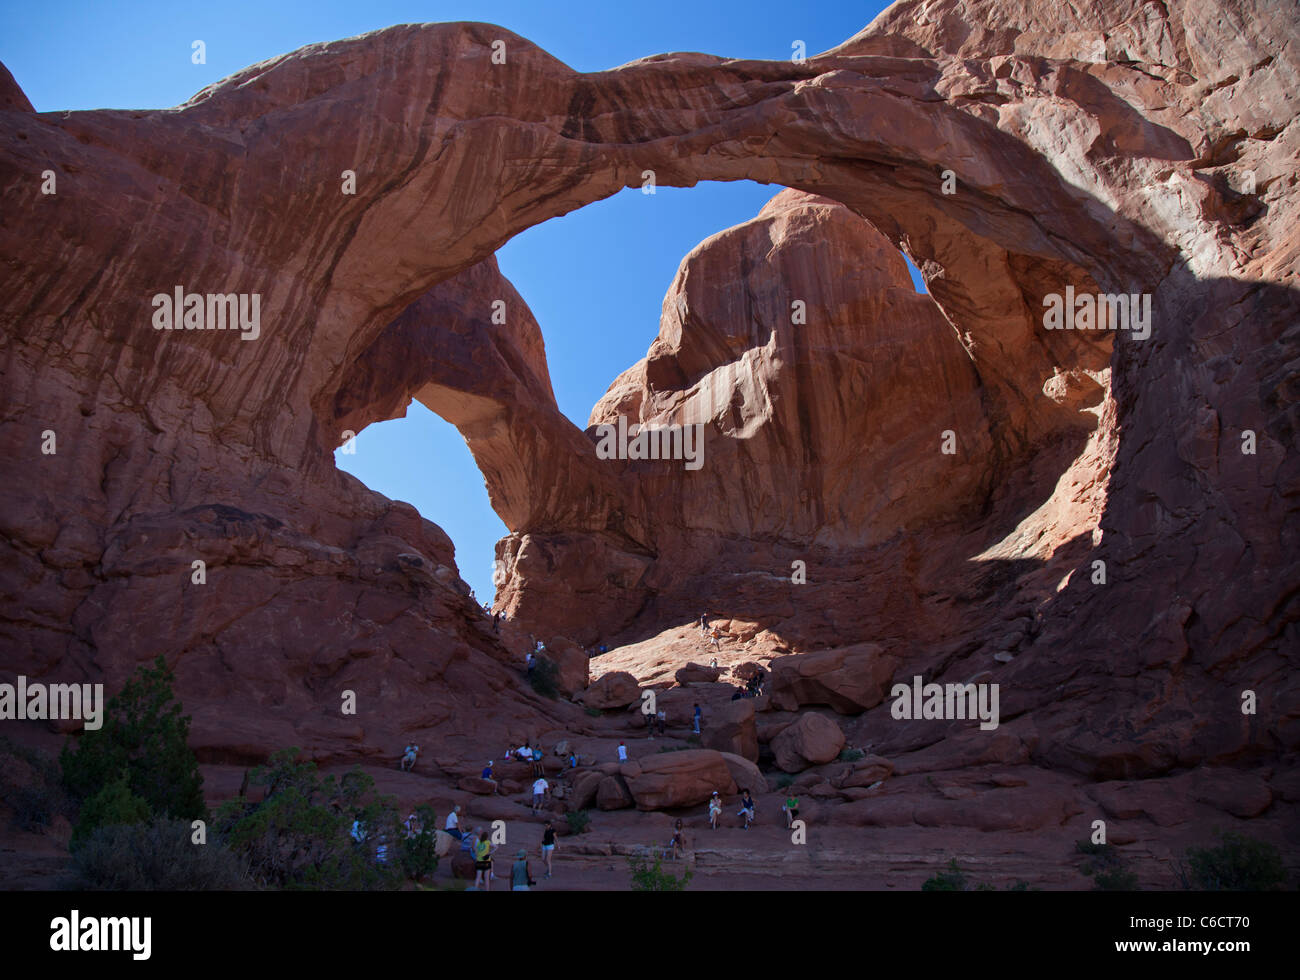 Moab, Utah - Double Arch im Arches National Park. Stockfoto